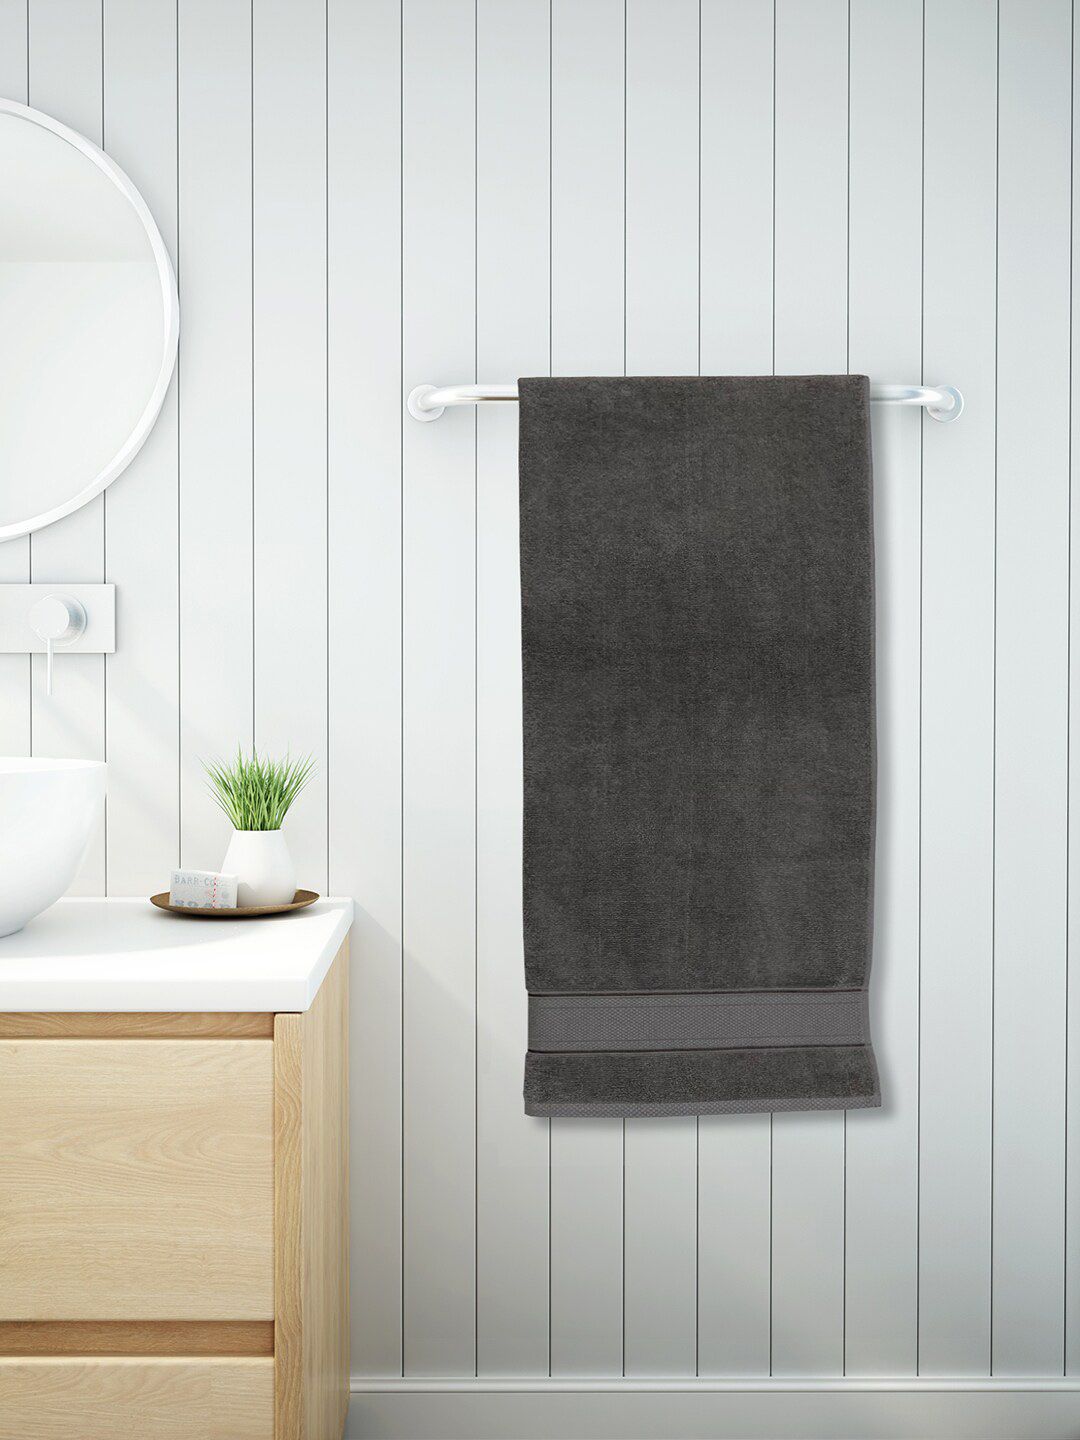 SPACES Charcoal Grey Solid 550GSM High Absorbent Cotton Bath Towel Price in India